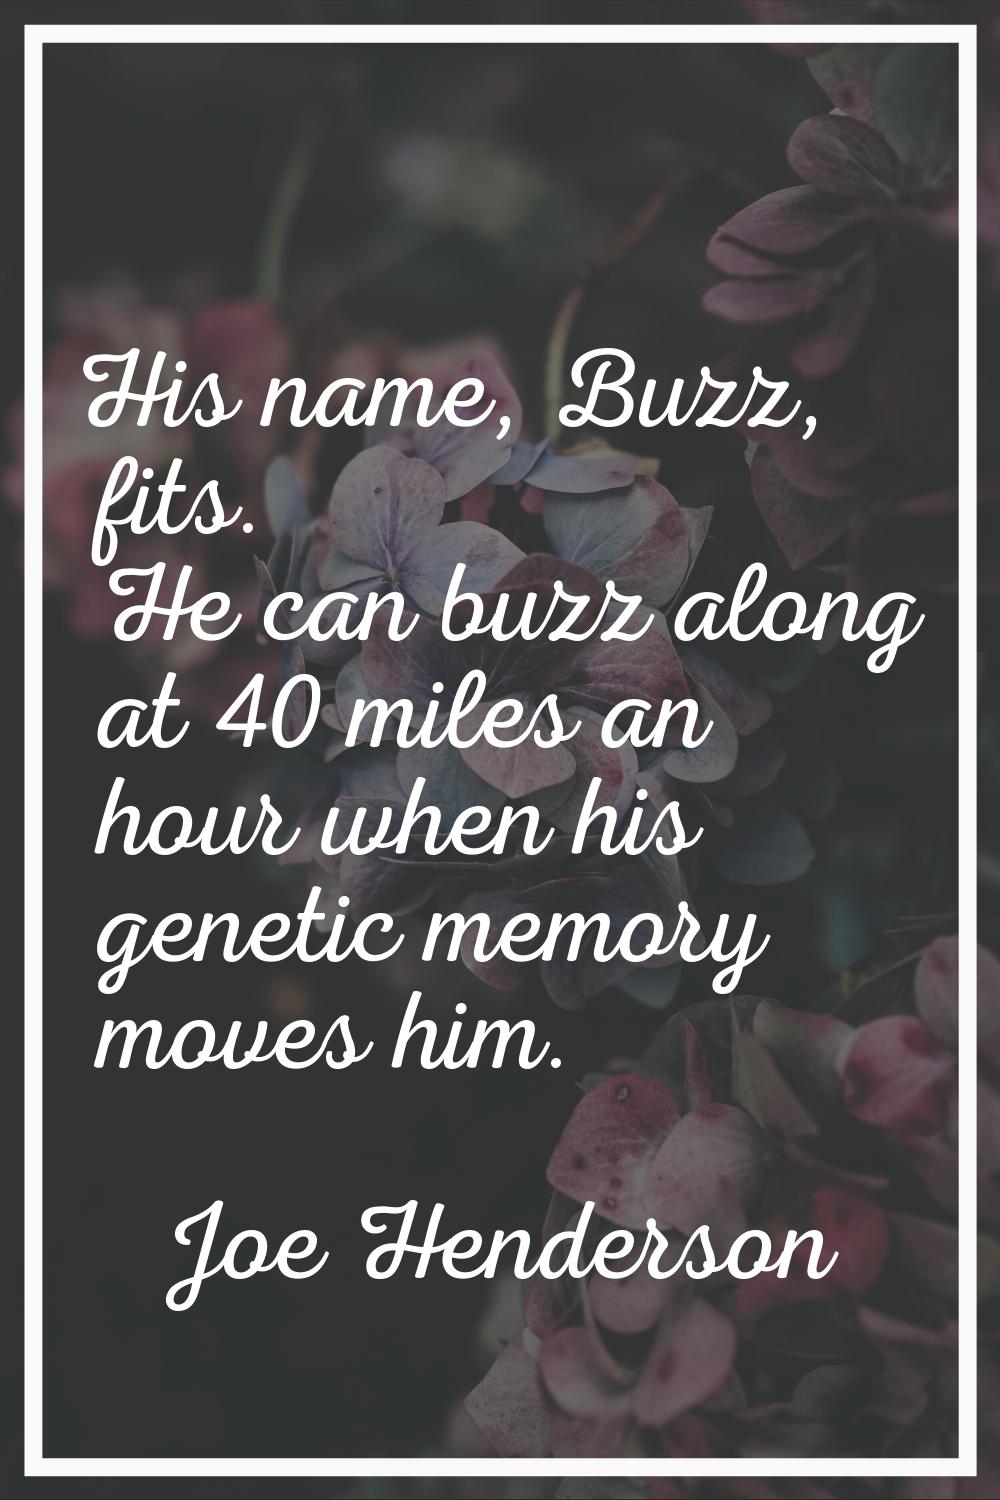 His name, Buzz, fits. He can buzz along at 40 miles an hour when his genetic memory moves him.